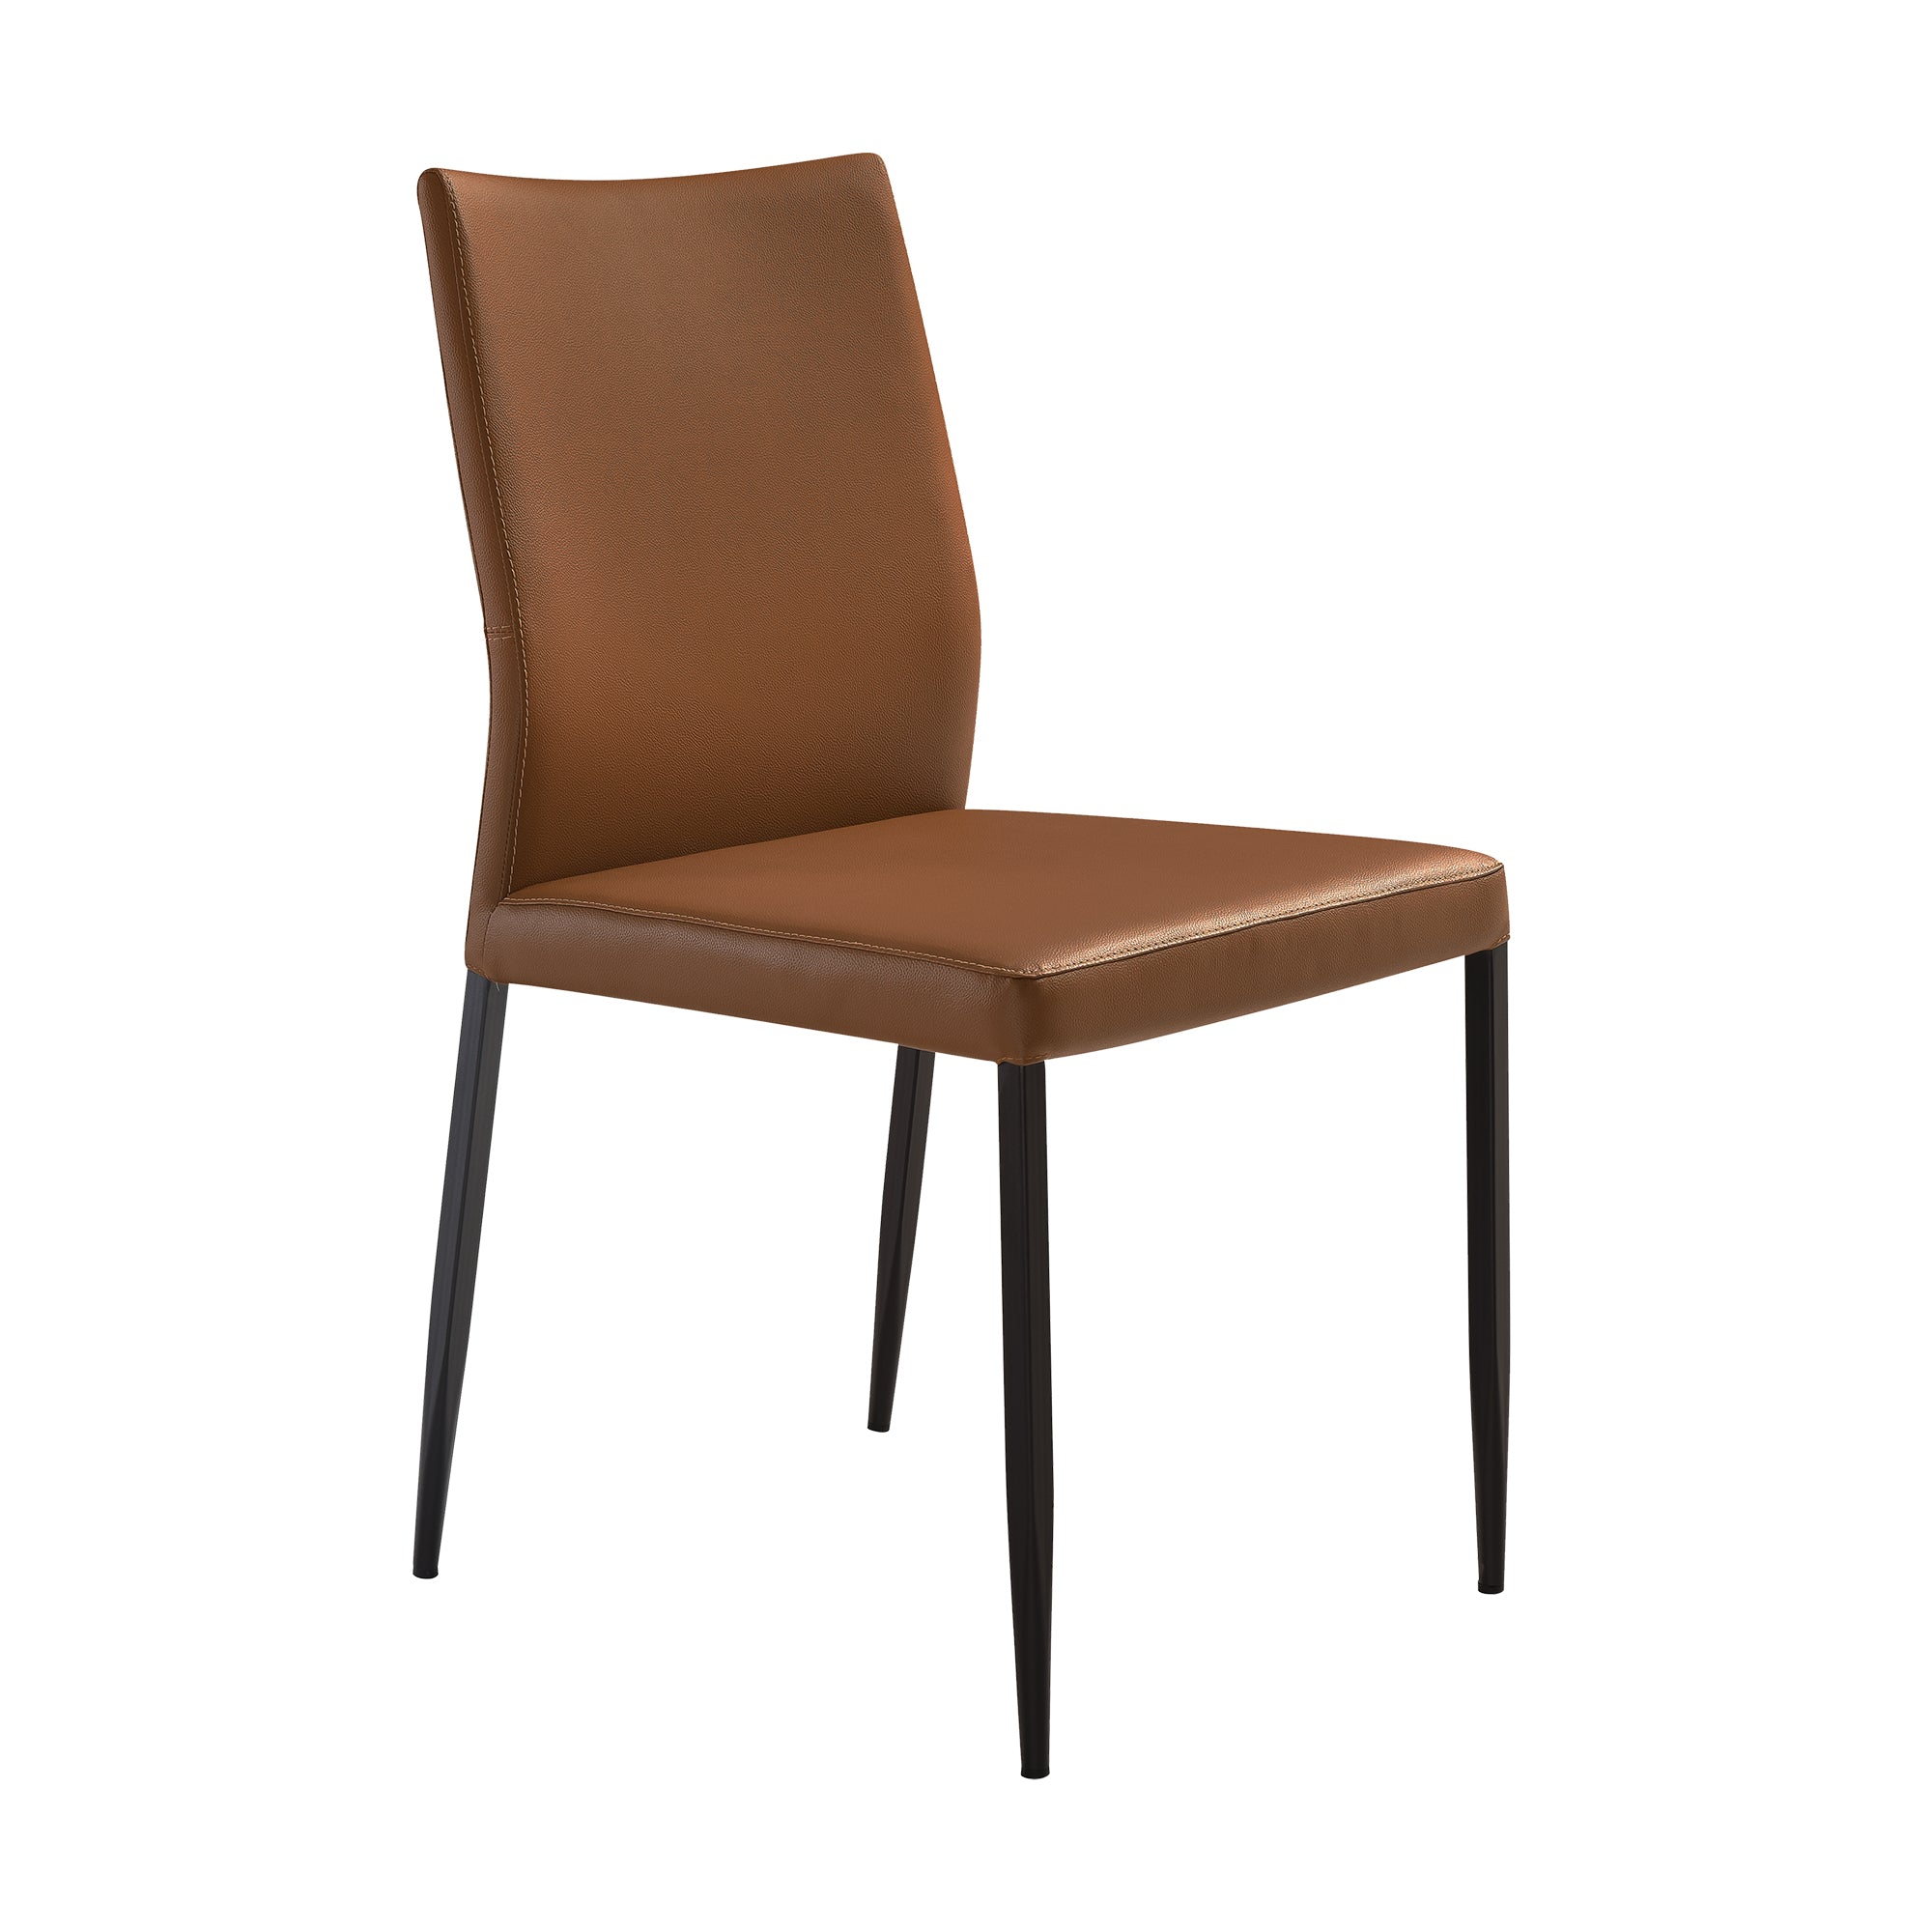 Kash Upholstered Dining Chair in Brown Faux Leather with Black Metal Legs - Set of 2 By Armen Living